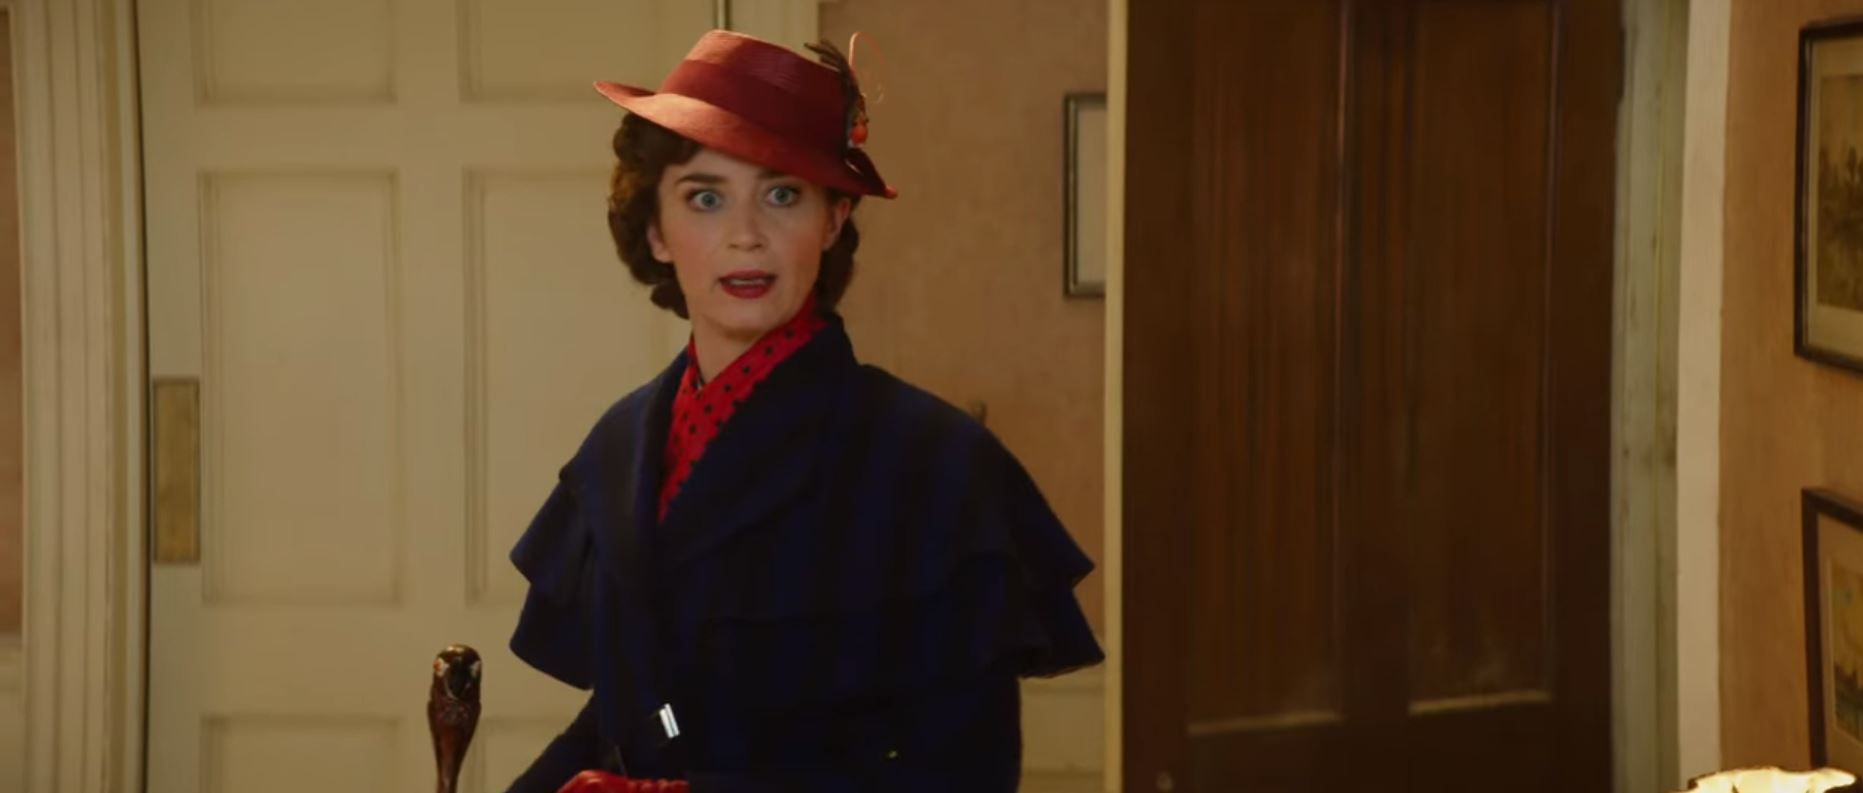 The First Full-Length Trailer For The 'Mary Poppins' Sequel Is Here And It's Magical